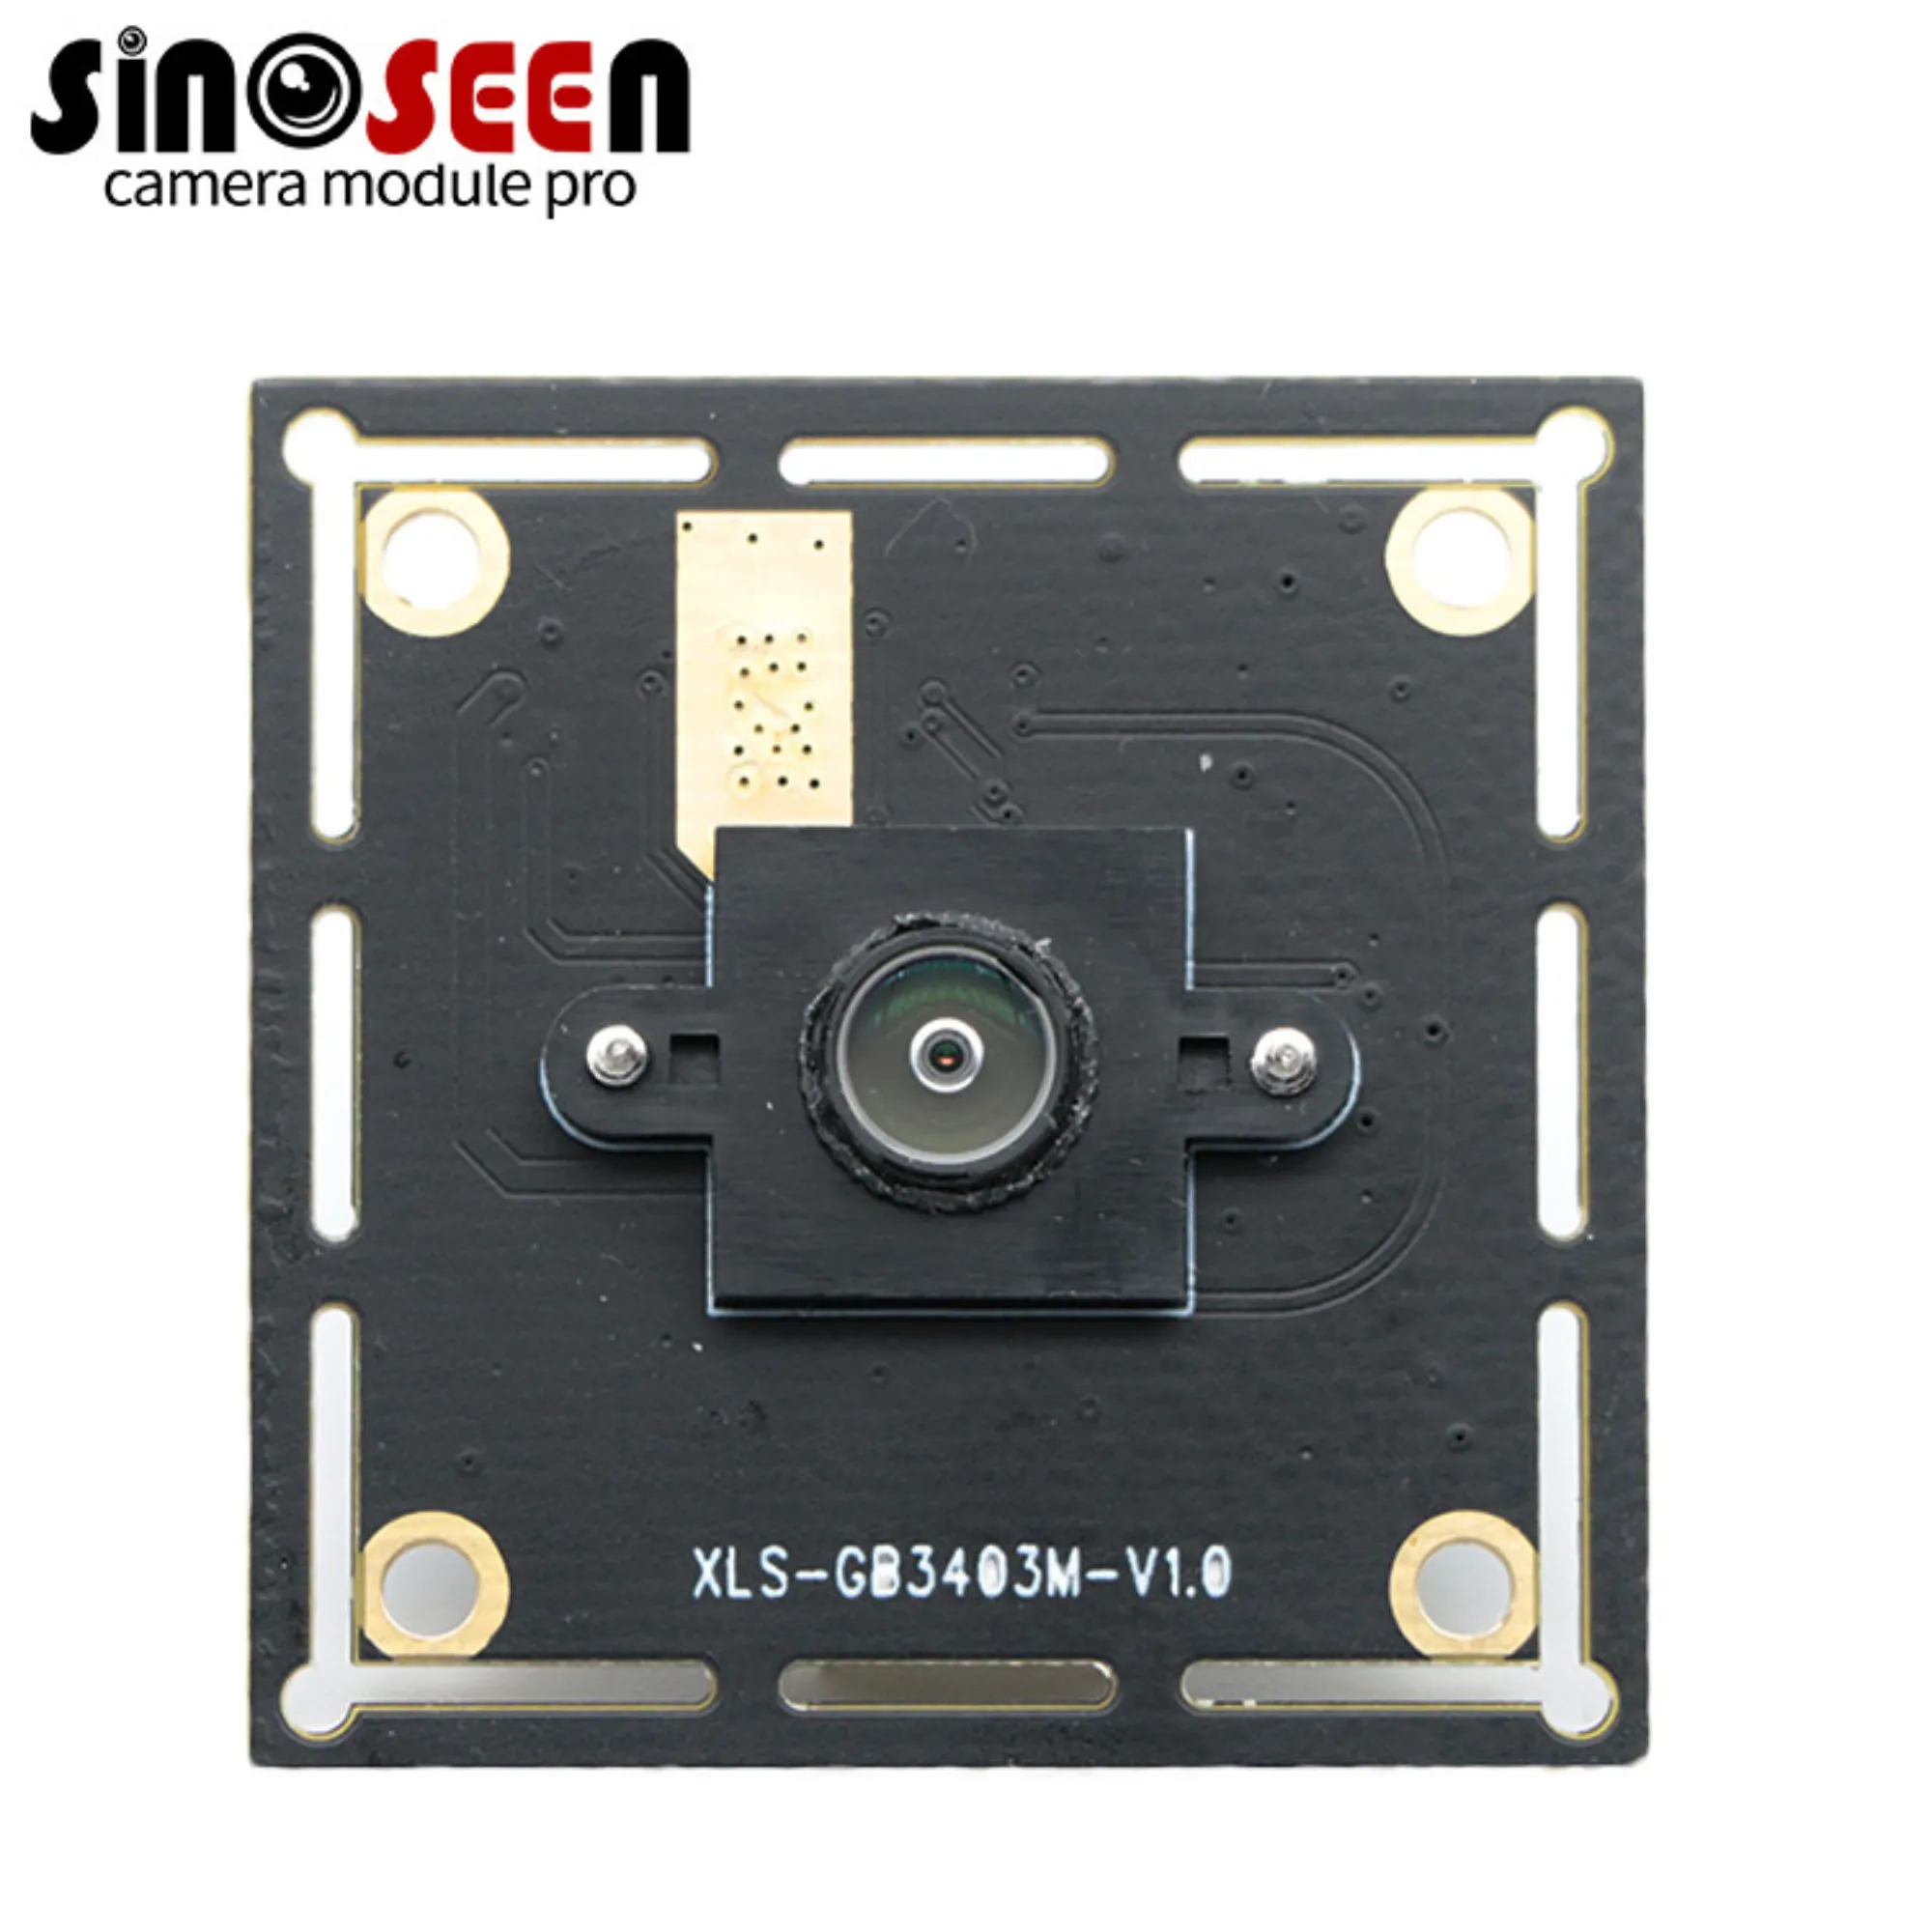 120FPS OV7251 USB Camera Module Global Exposure For Machine Vision Inspection